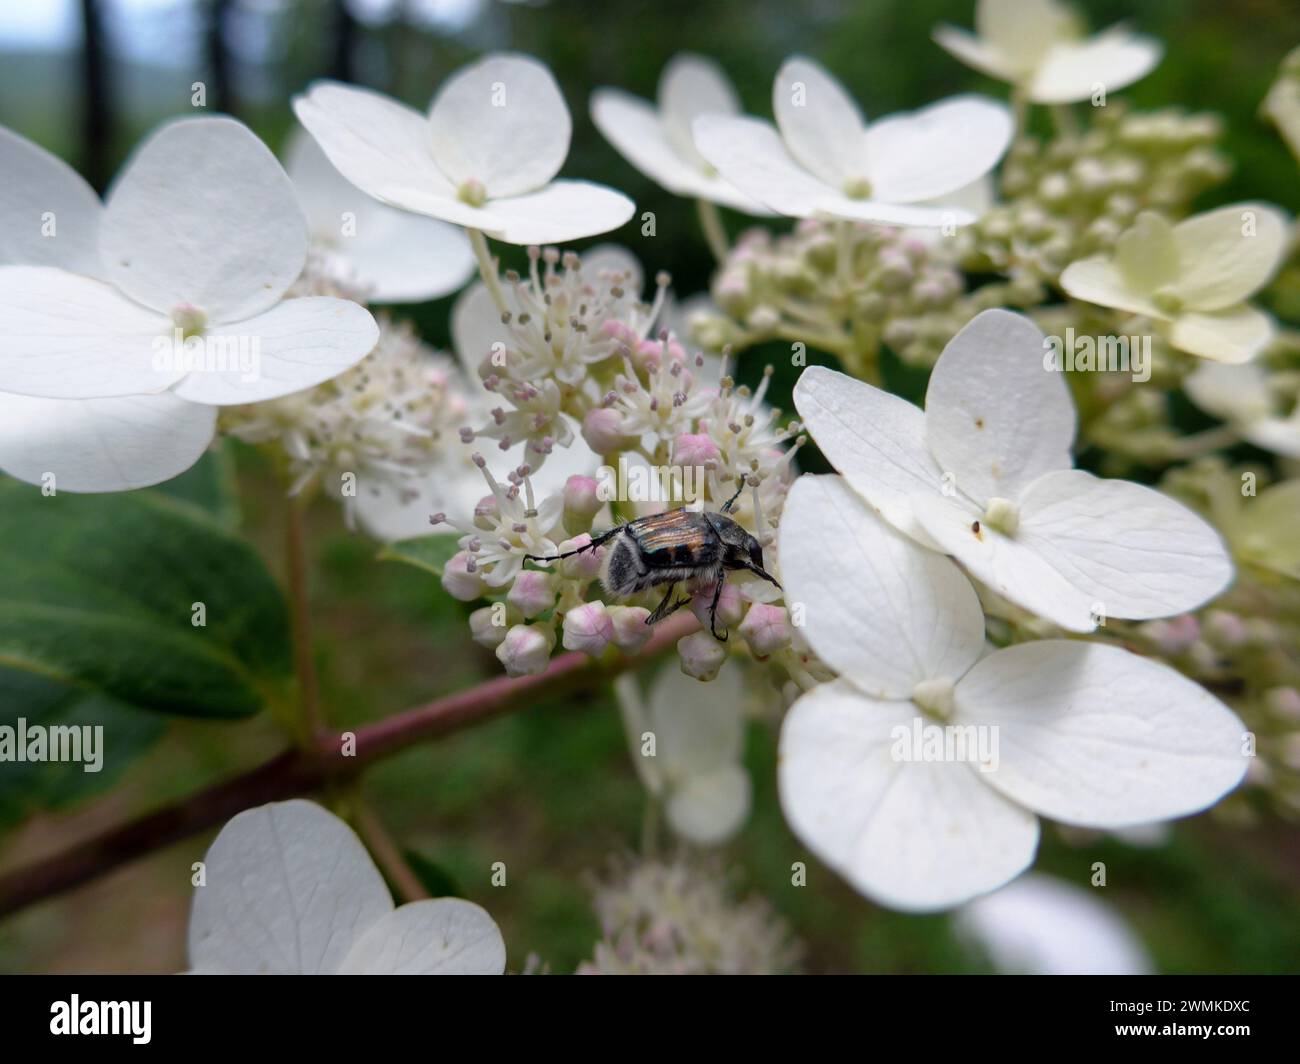 Unidentified insect drinks nectar from a blossoming hydrangea plant Stock Photo